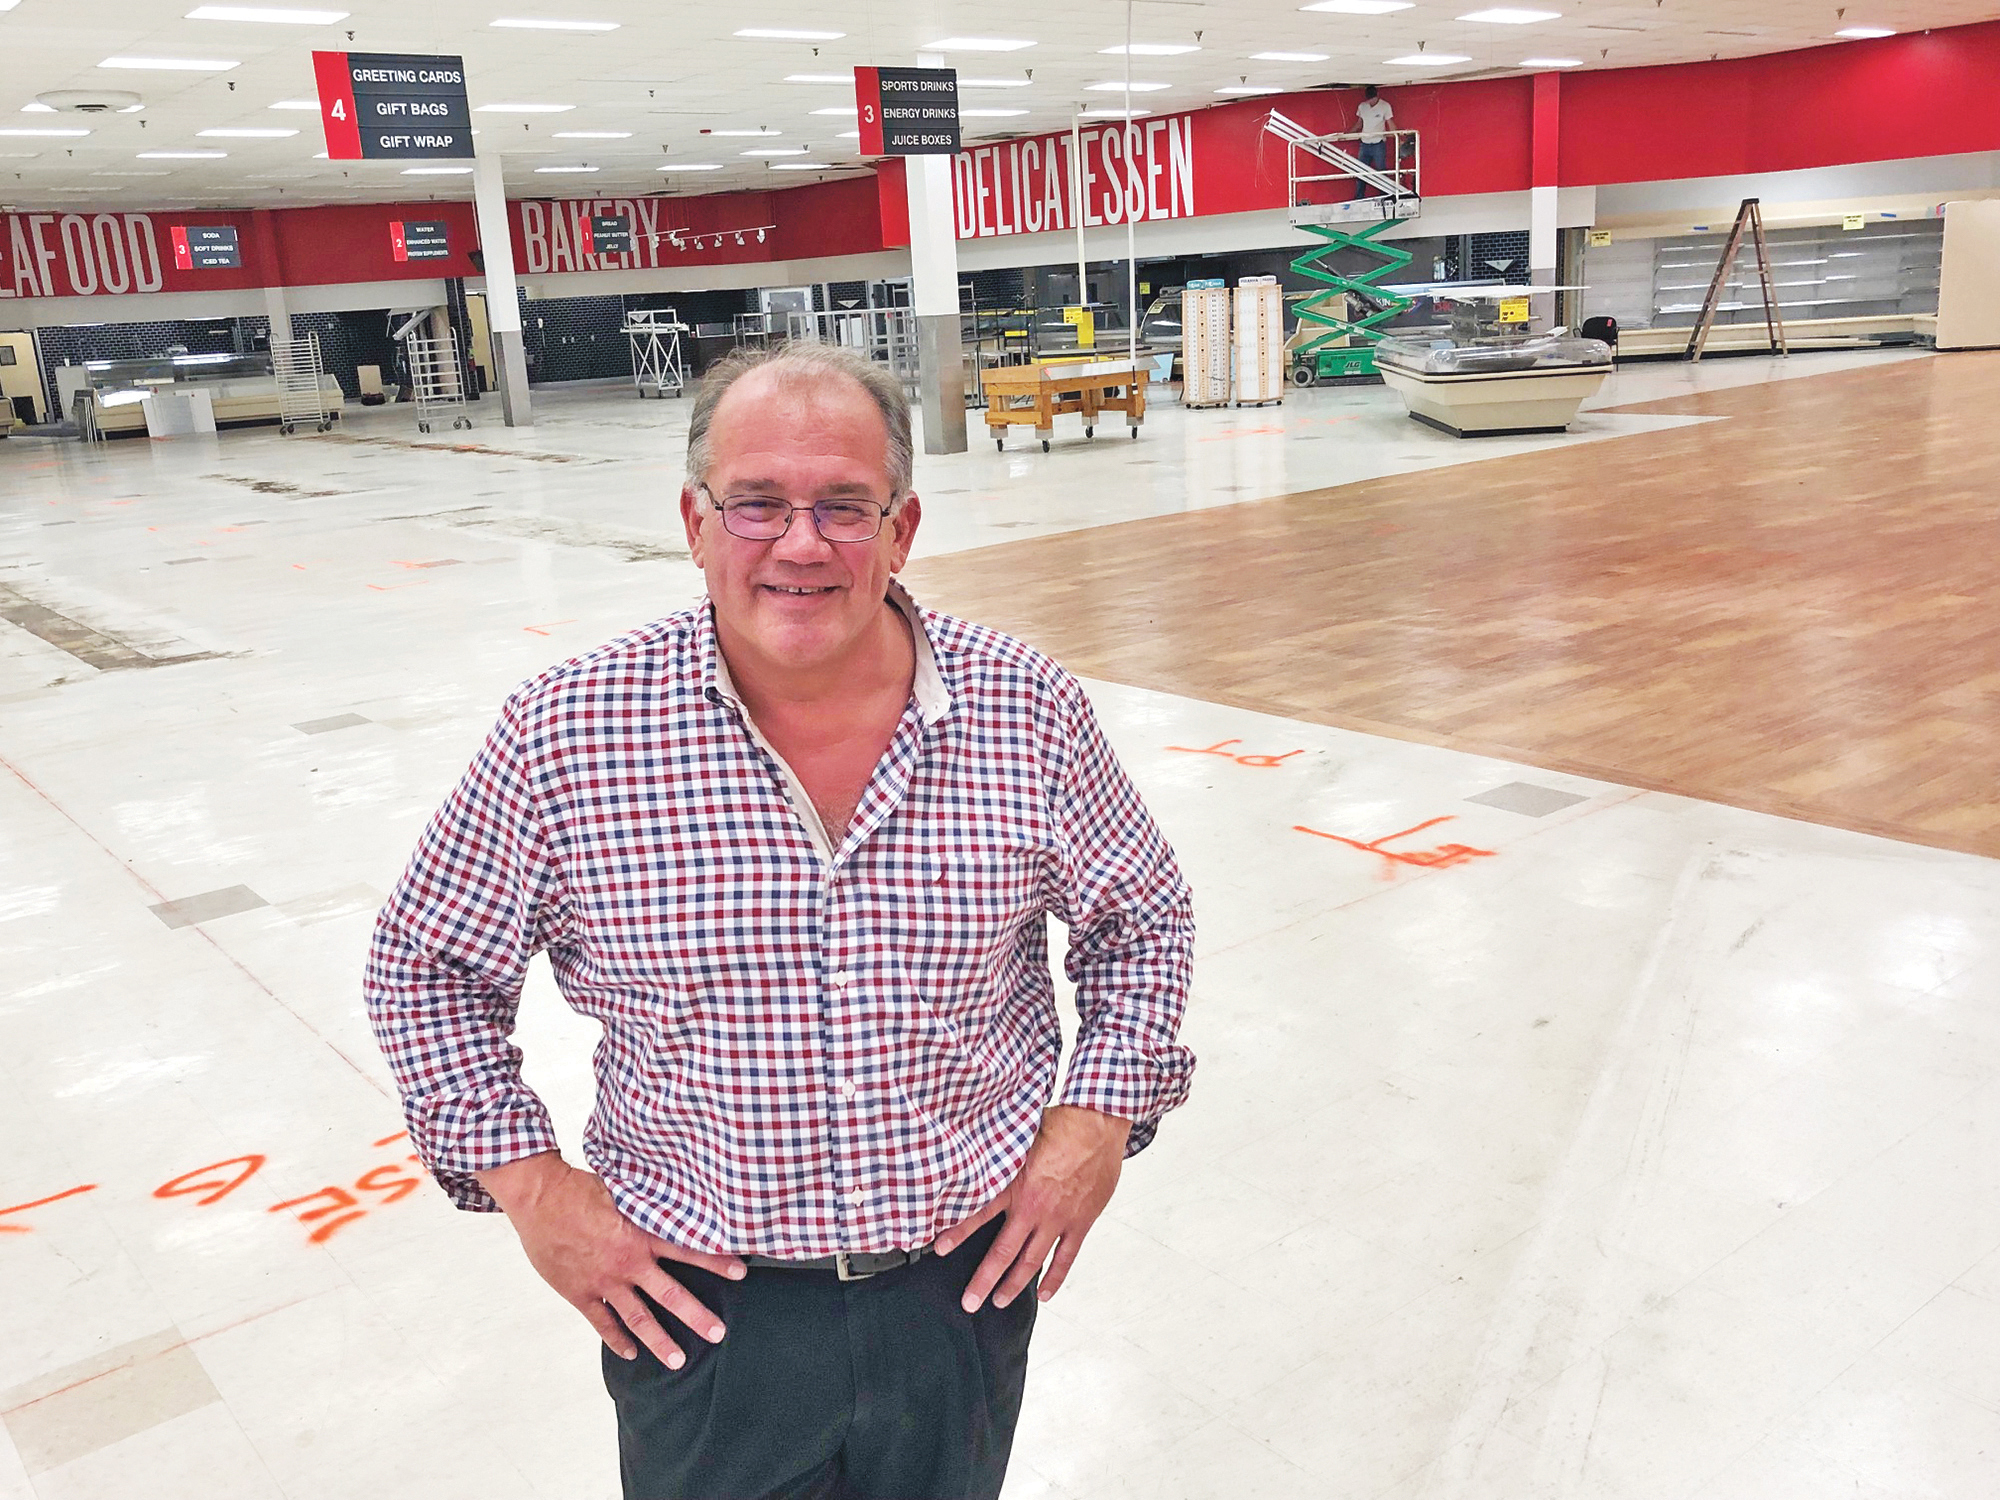 Rowe's IGA Supermarkets owner Rob Rowe said he couldn’t agree to the landlord’s rental terms to take over the Publix space at Gateway Town Center.